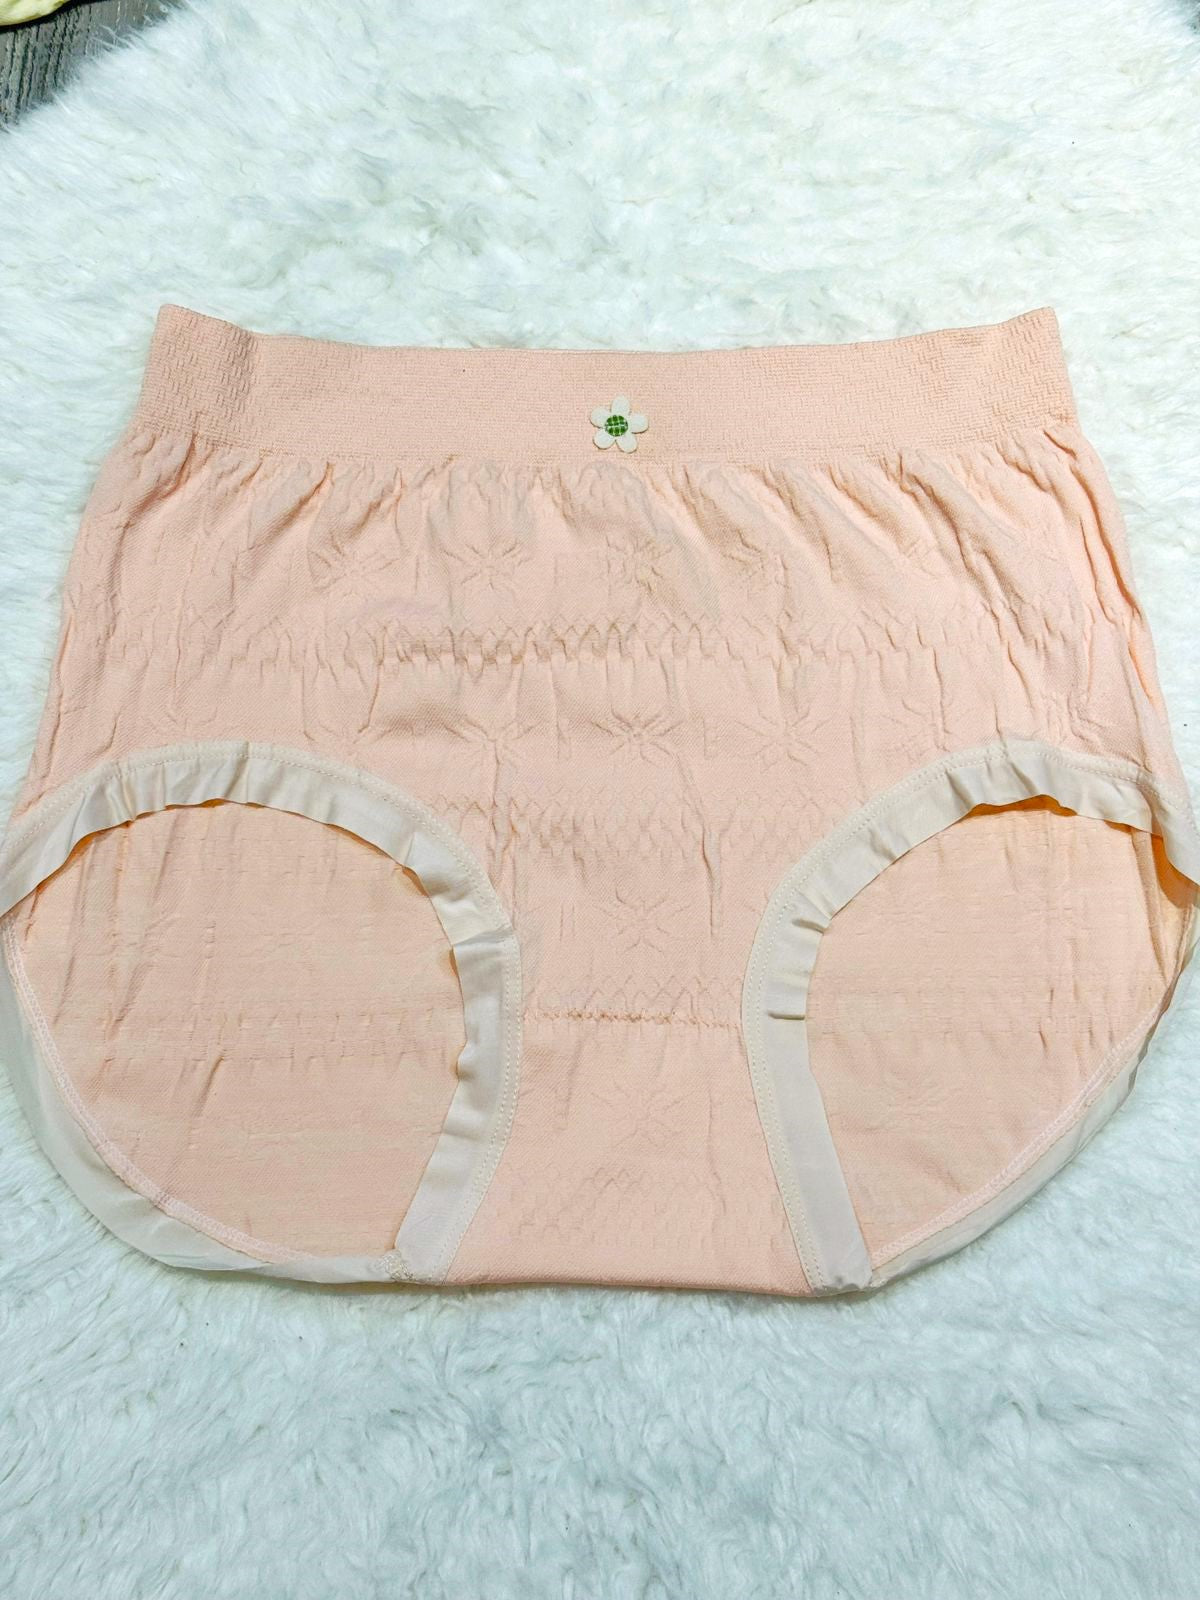 Plus Size Extra Stretchable Brief Cotton Panty